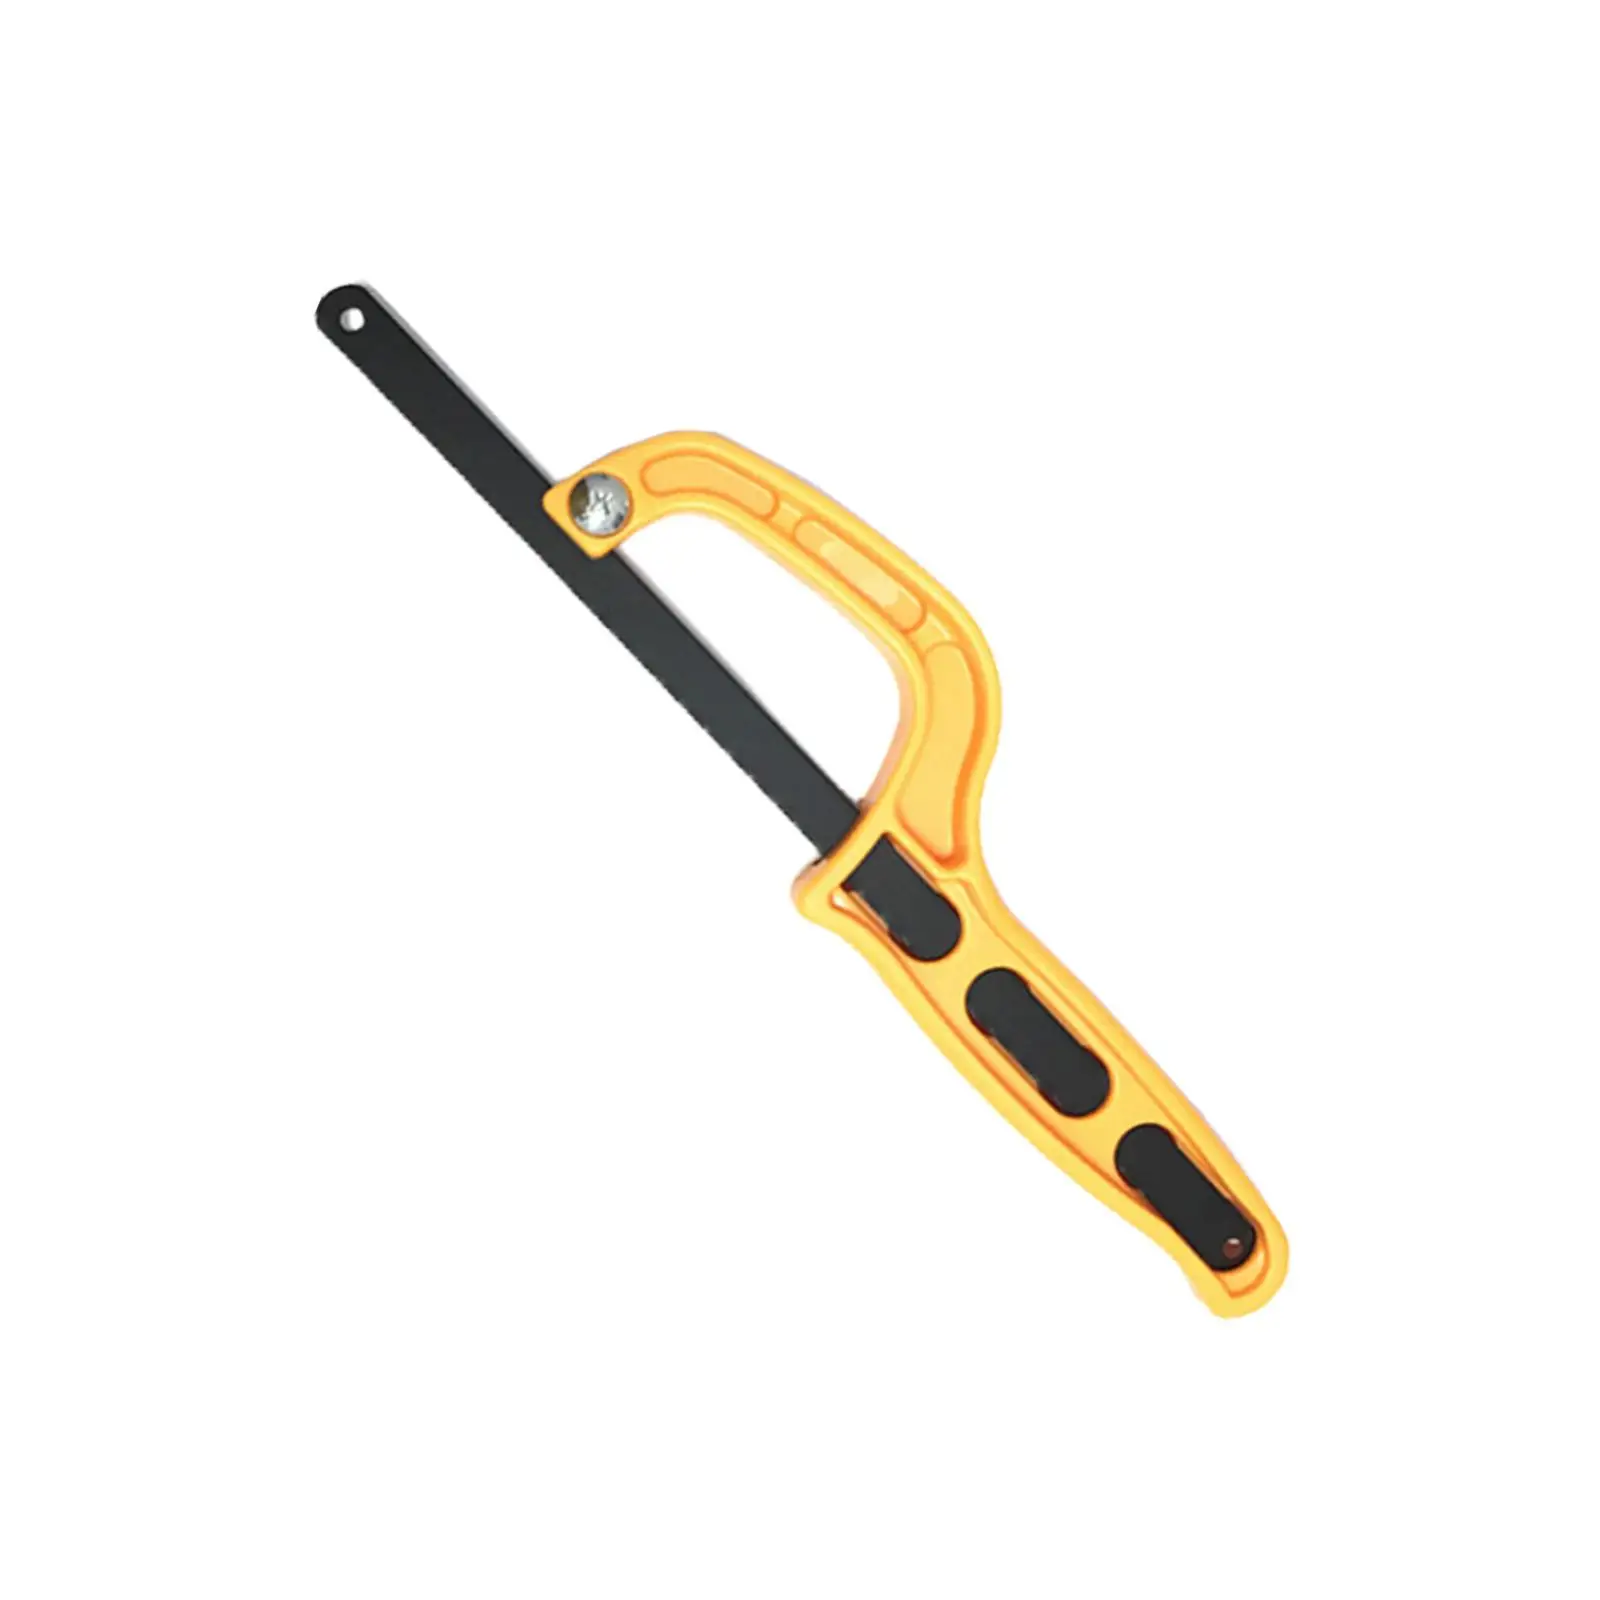 Portable Hacksaw Hand Saw Wood Metal Cutting Wood Trimmer Garden Household Carpentry Manual Outdoor Small Heavy Duty Pruning Saw